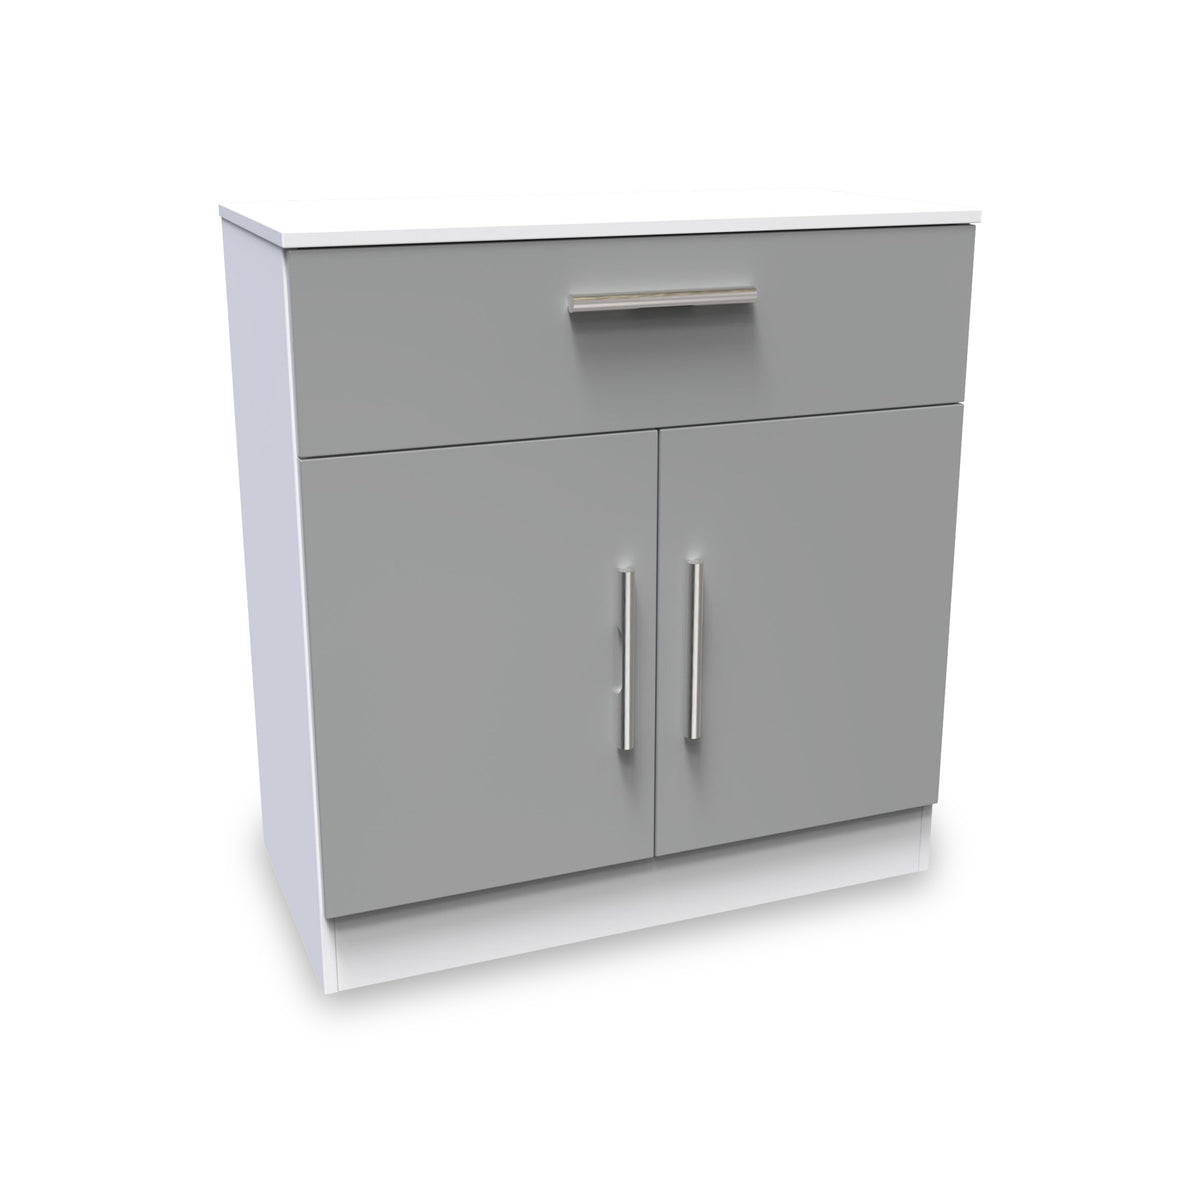 Blakely Grey and White 1 Drawer 2 Door Sideboard from Roseland Furniture